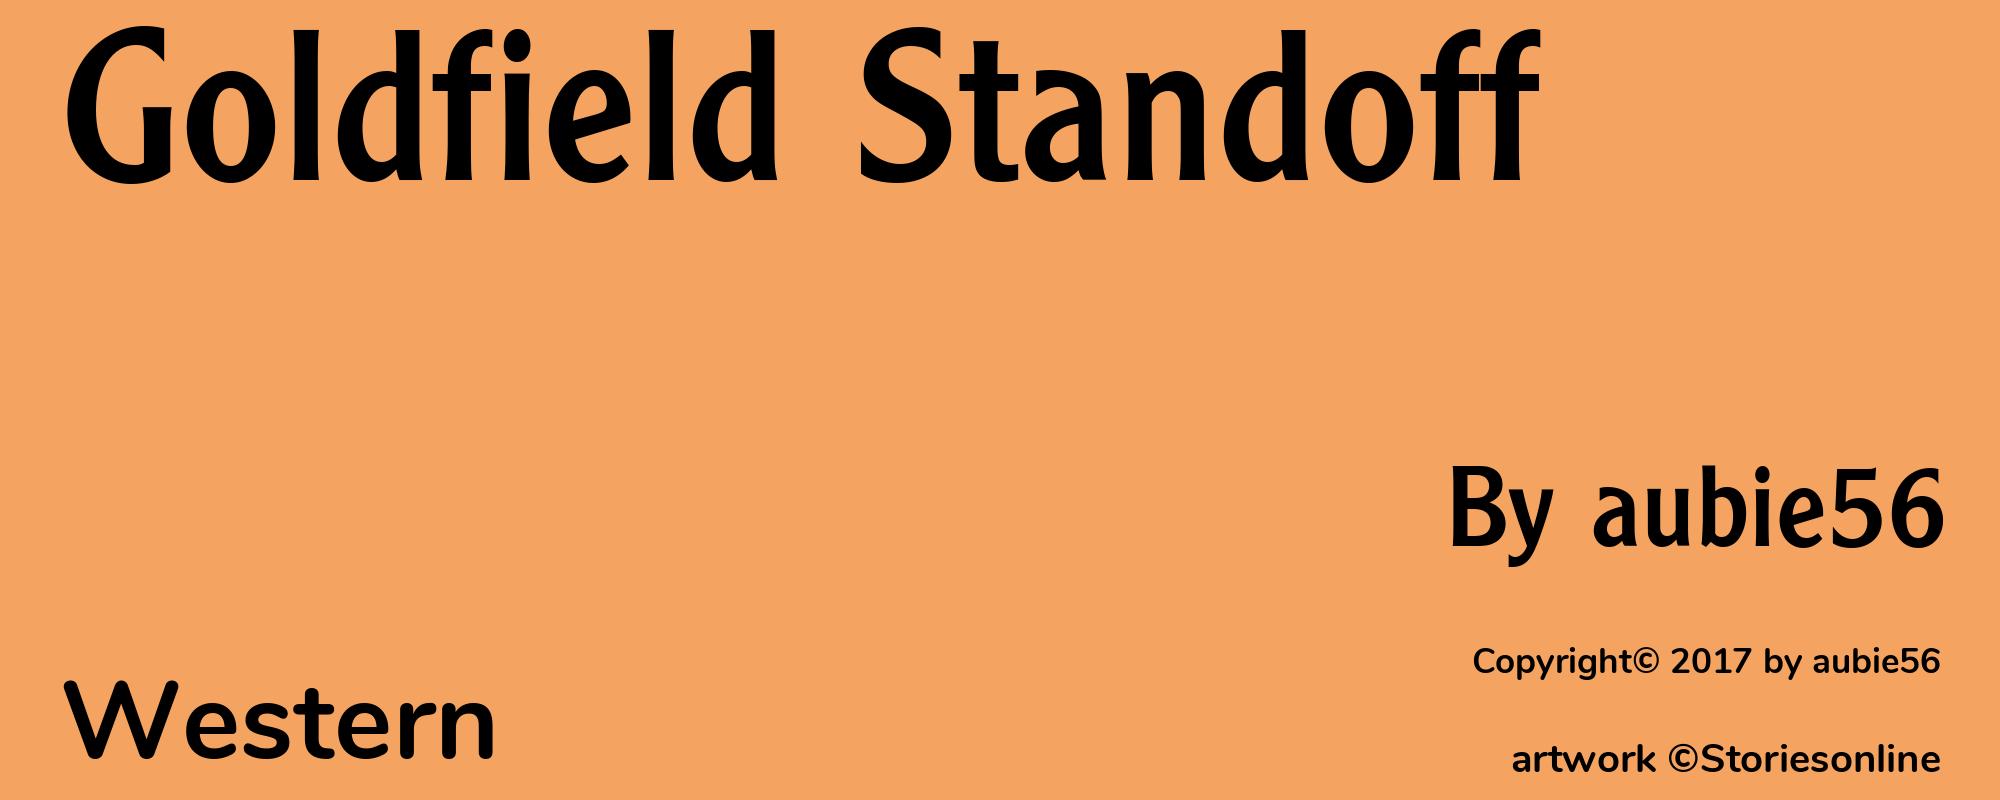 Goldfield Standoff - Cover